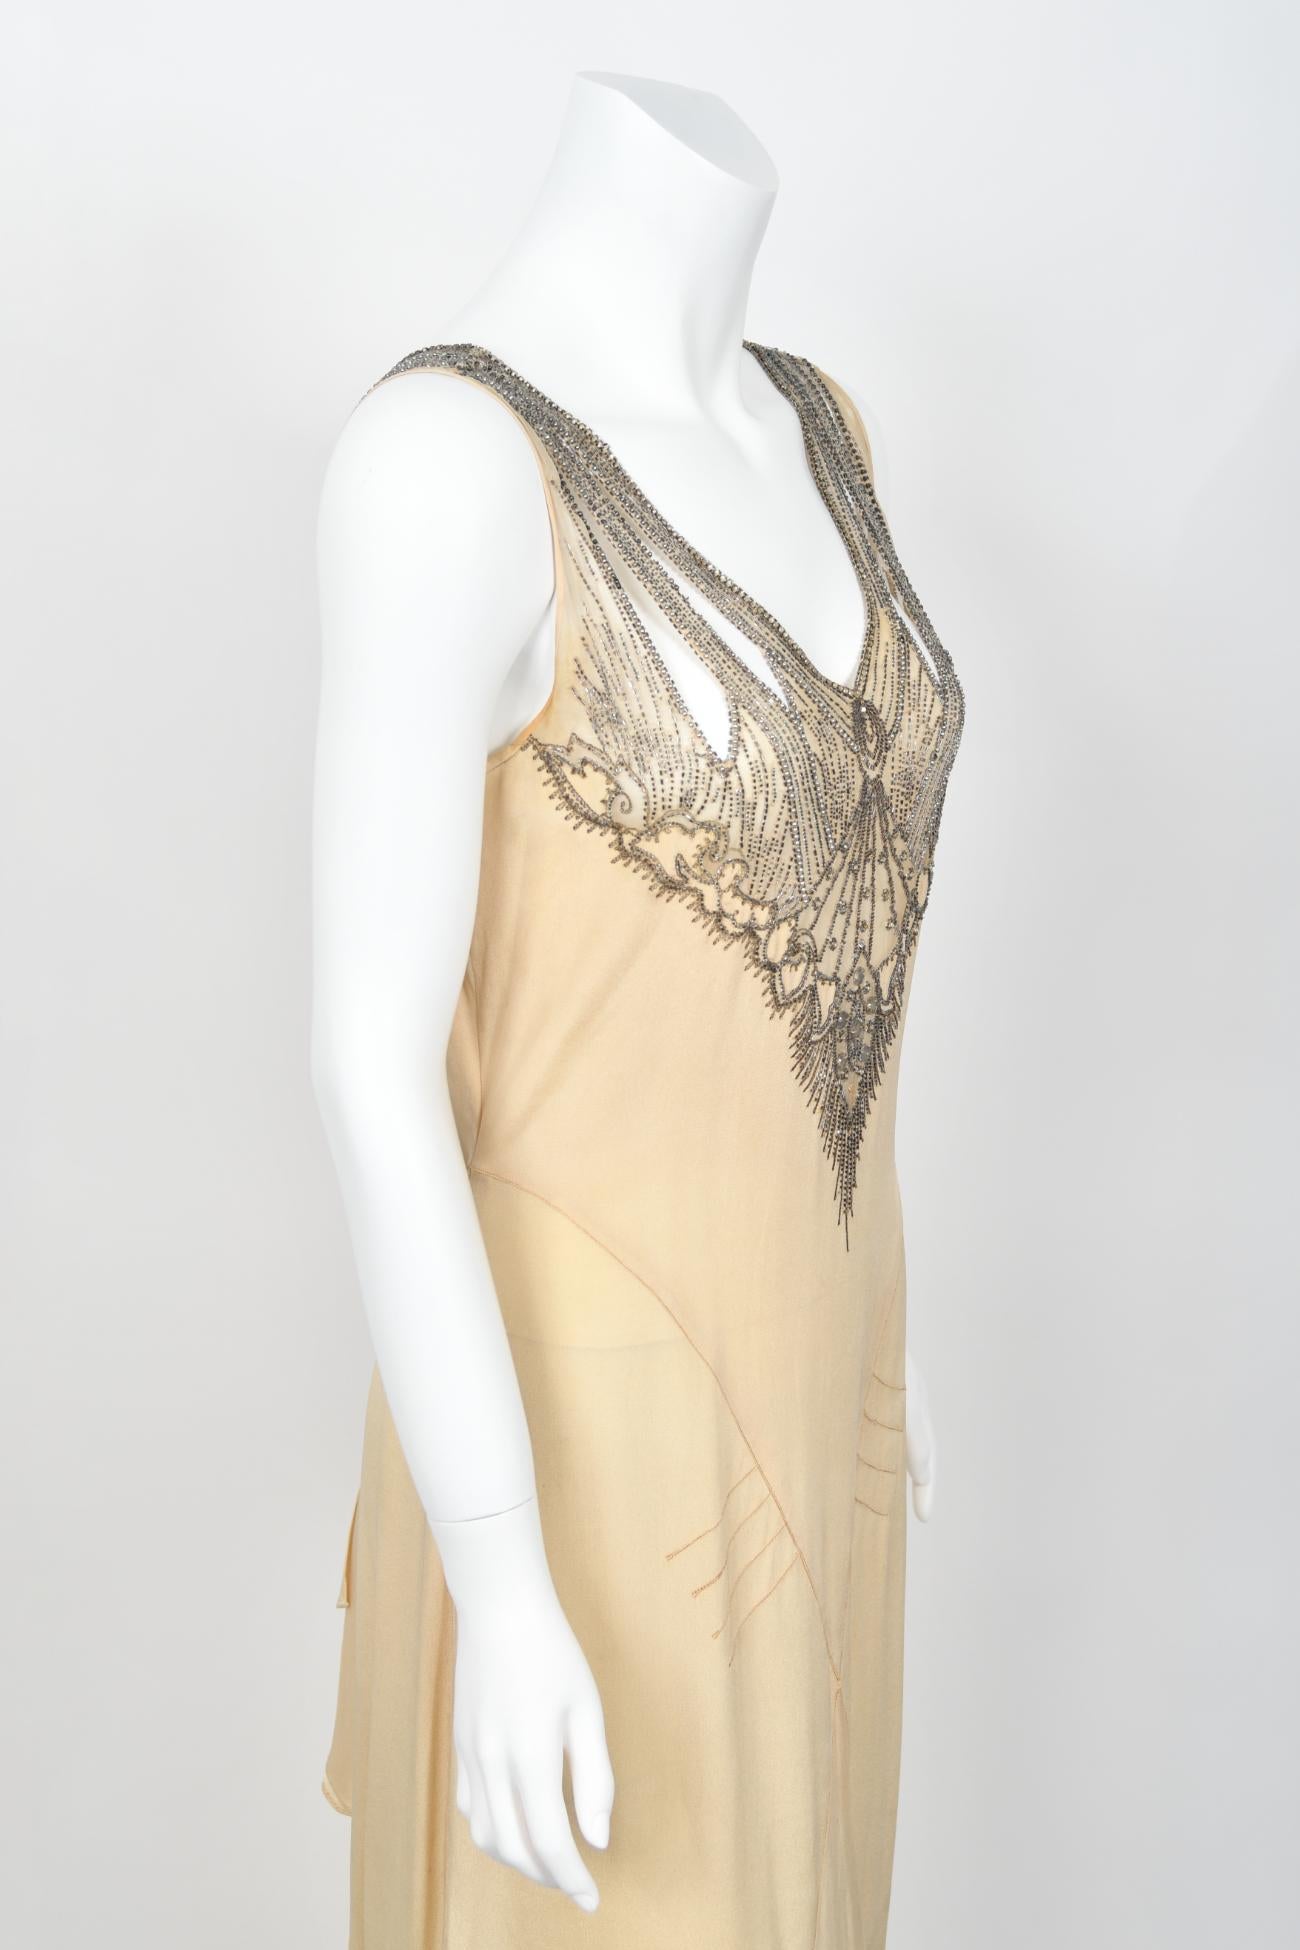 1930's French Ivory Creme Silk Beaded Sheer Illusion Deco Bias-Cut Bridal Gown   For Sale 8